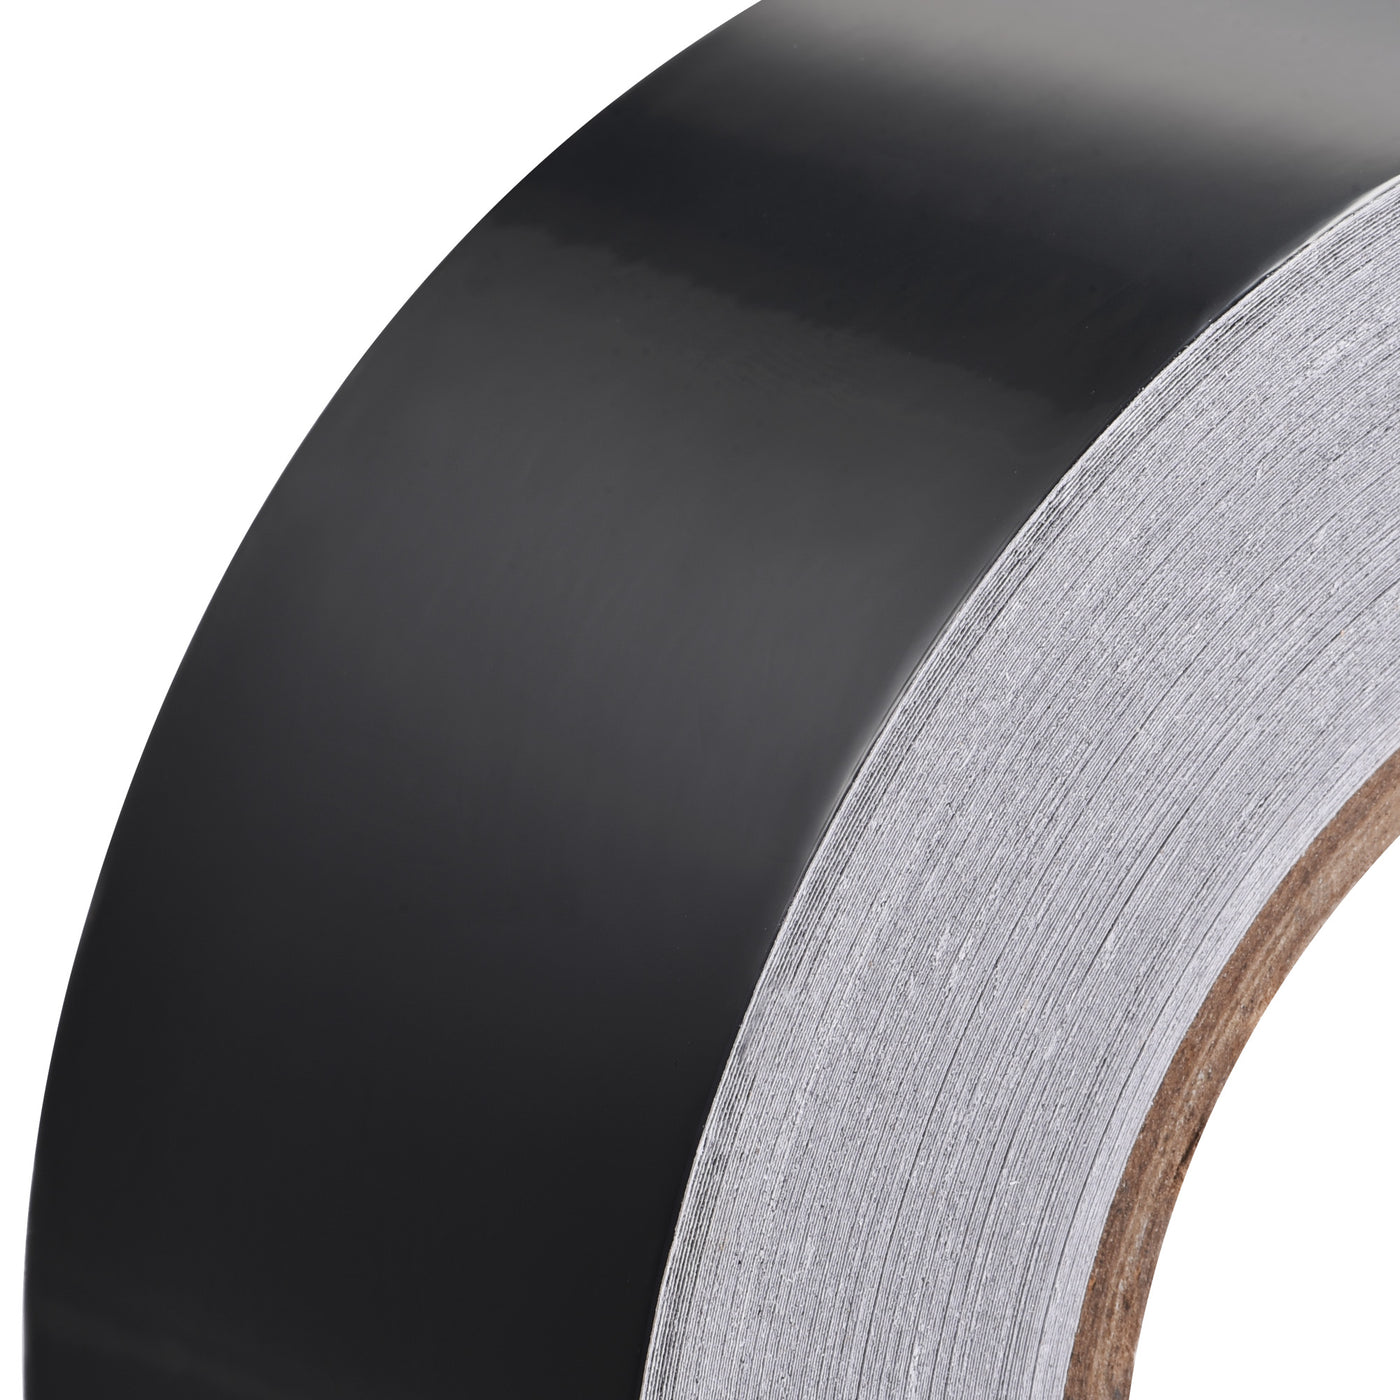 uxcell Uxcell Aluminum Foil Tape Black Matte Tape Non Reflective 50mmx50m/164ft for HVAC, Sealing, Patching Hot and Cold Air Ducts